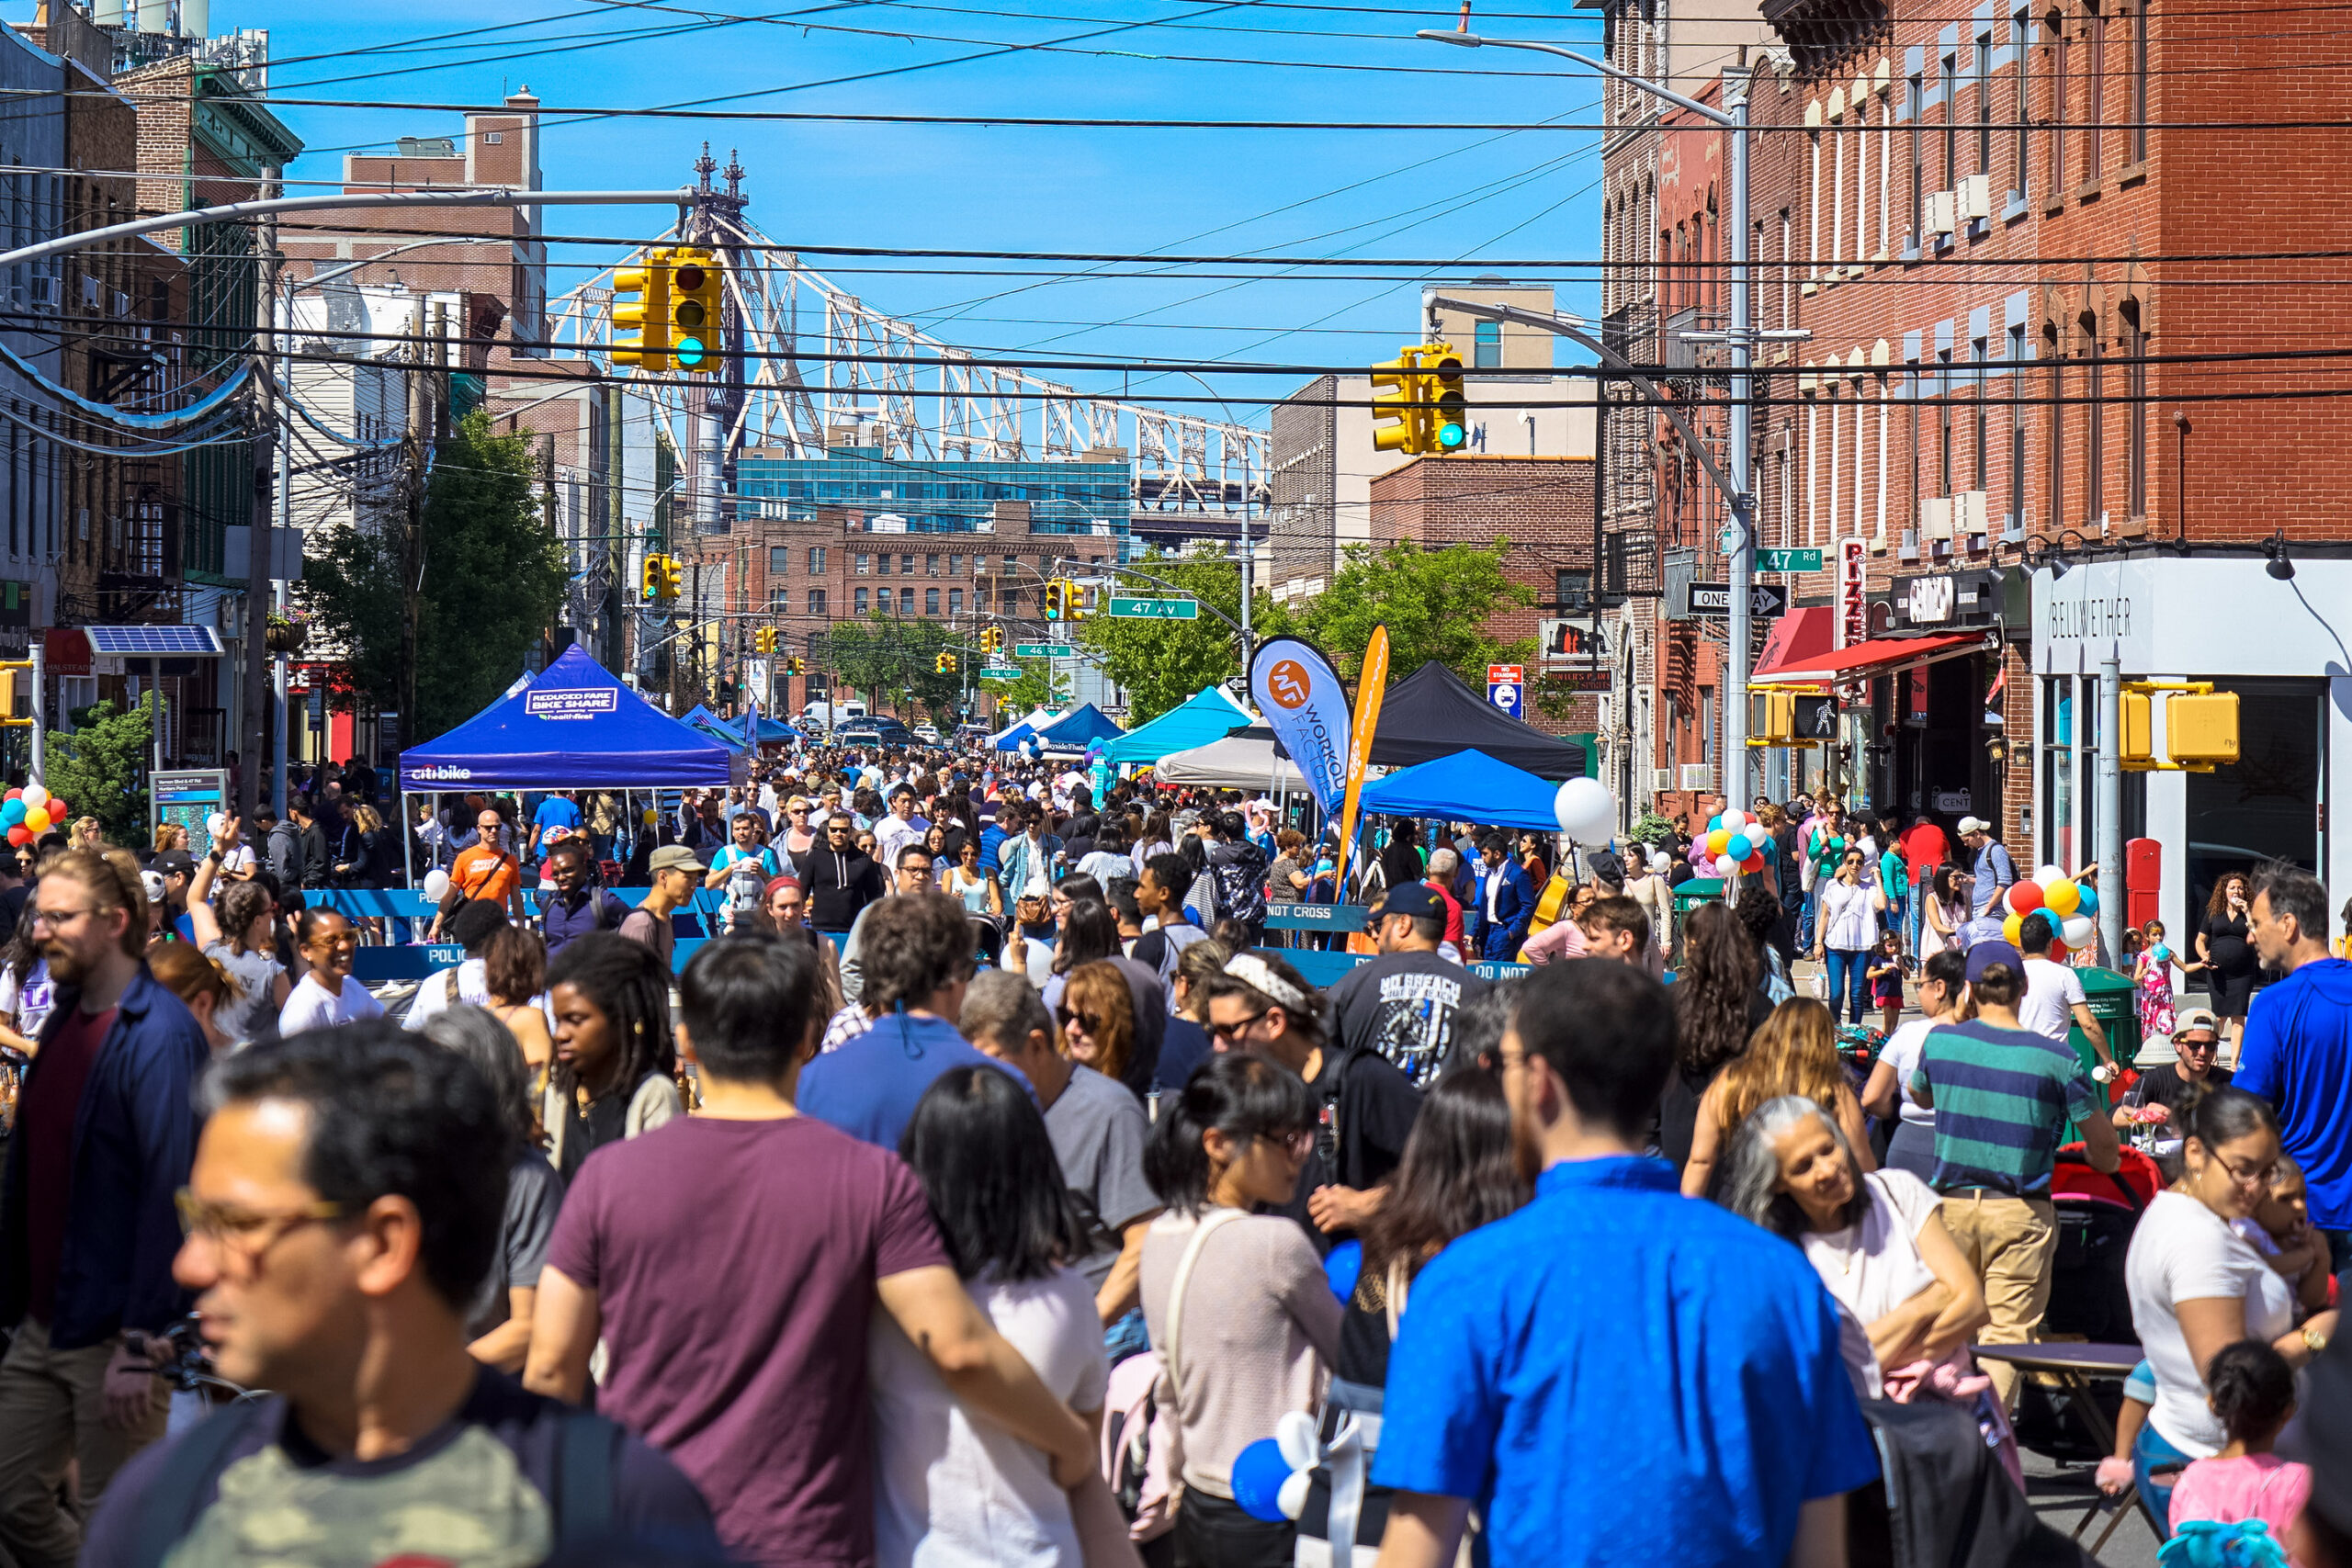 large group of people at a street festival in Long Island City, Queens